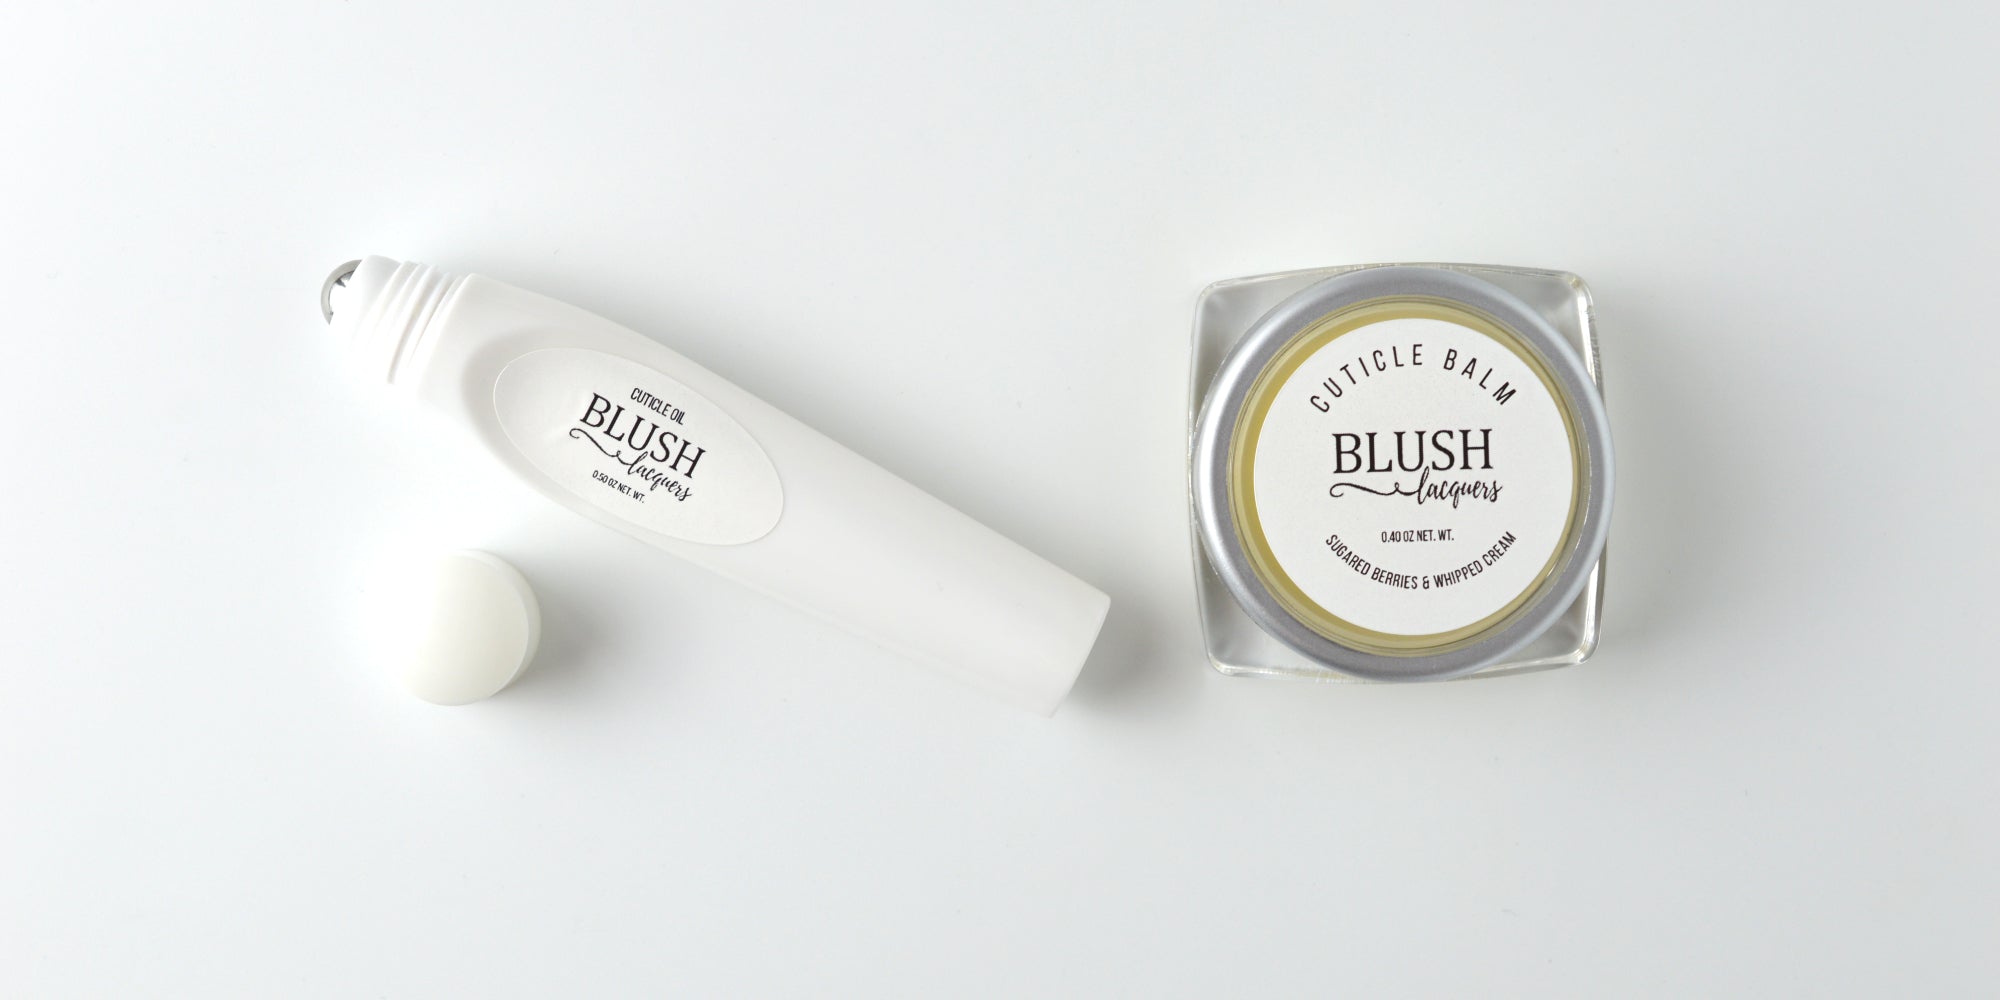 Get Great Looking Nails: The Benefits Of Using Cuticle Oils & Cuticle Balms - BLUSH